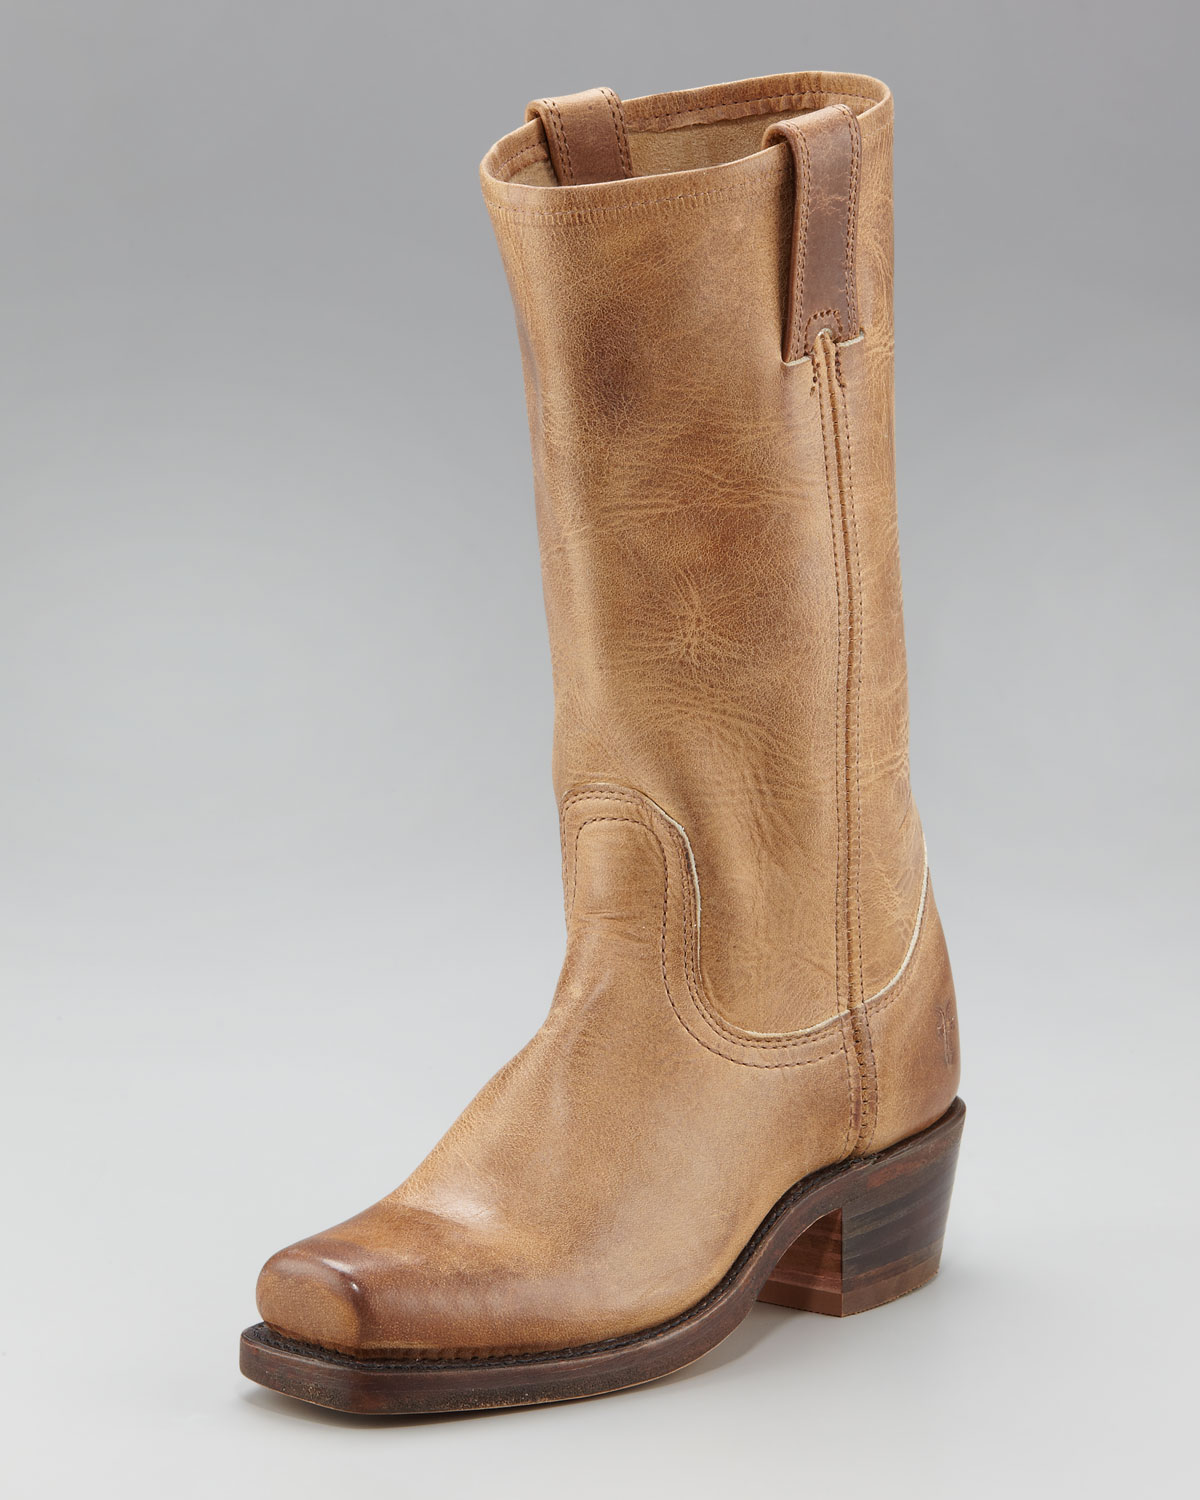 Lyst - Frye Classic Cavalry Boot in Natural